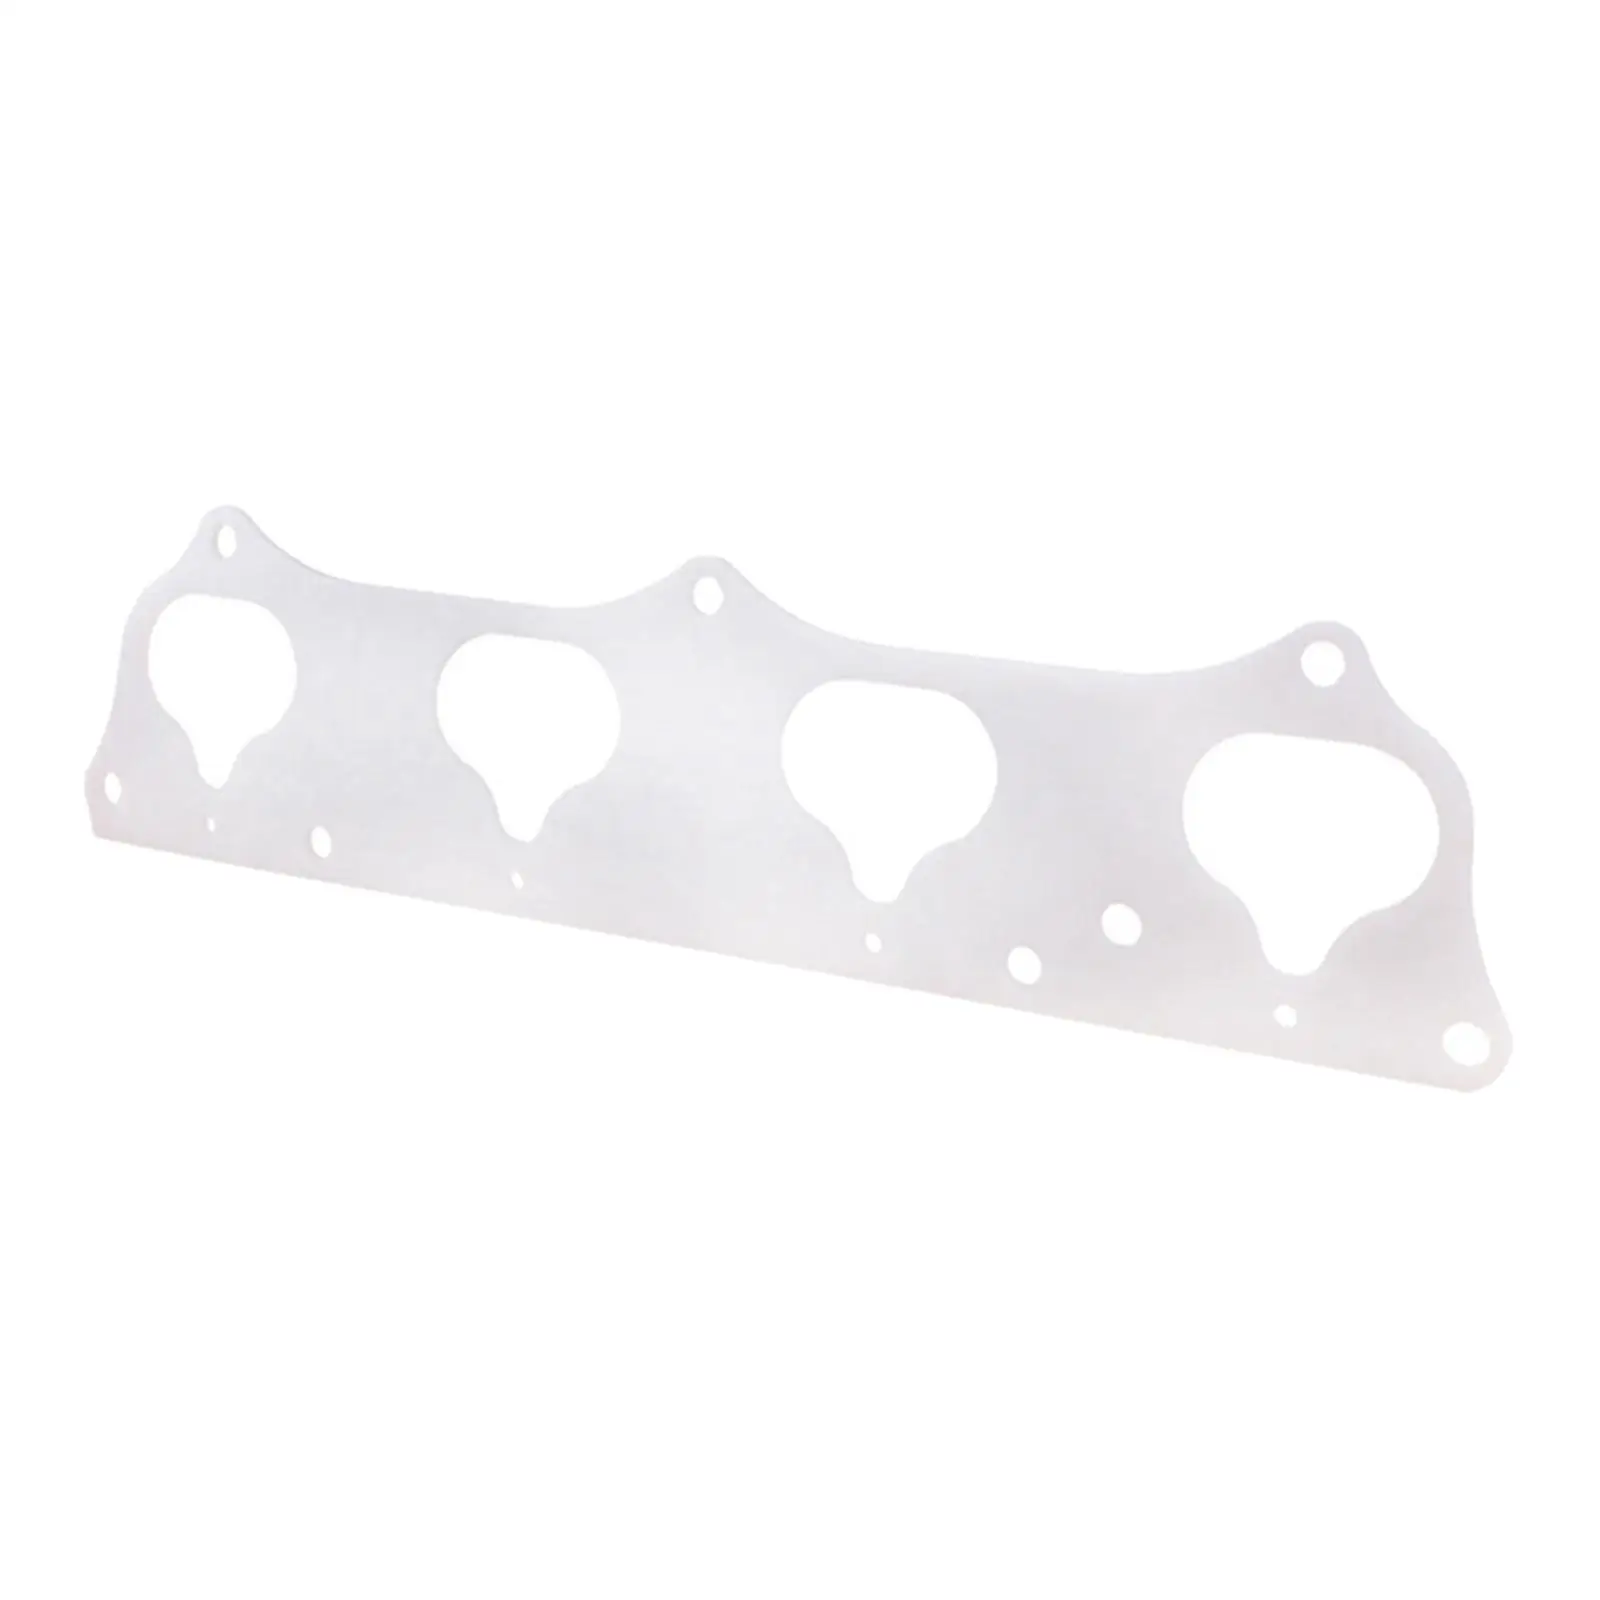 Car Thermal Intake Manifold Gasket High Performance Premium Durable Accessories Replacement for Swap K20A/A2/A3/Z1 K-series